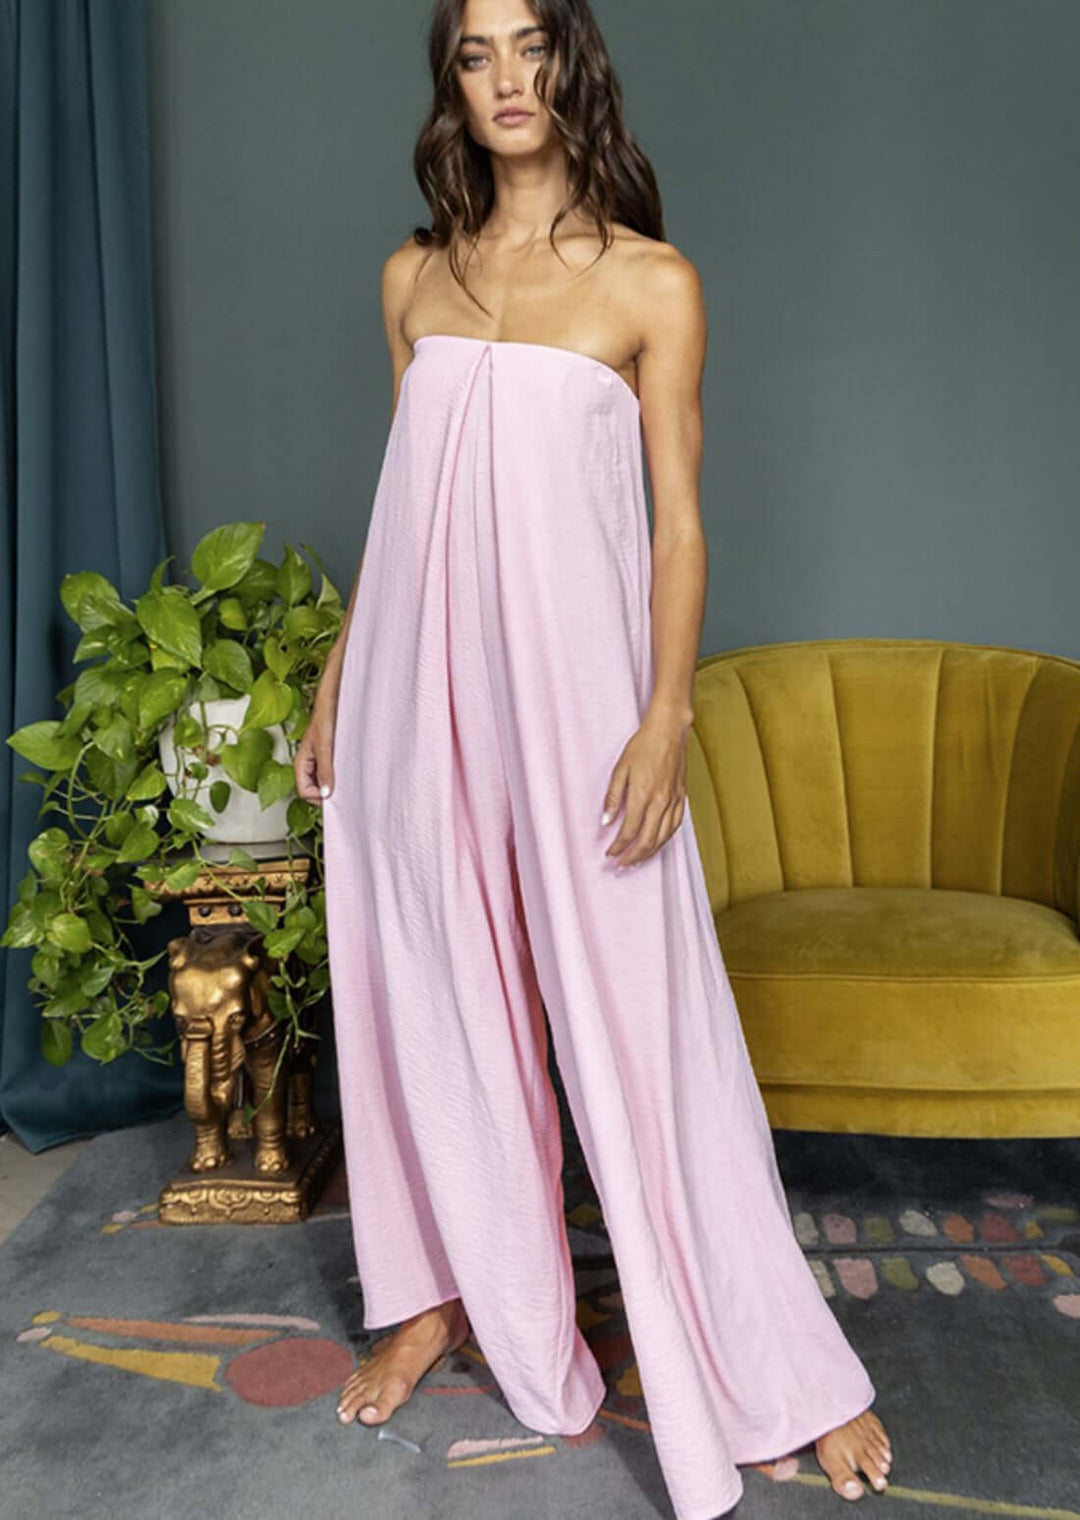 Bucket List Clothing Style R5307 | Ladies Strapless Flowy Pink Jumpsuit with Inverted Front Pleating and Side Pockets | Made in USA